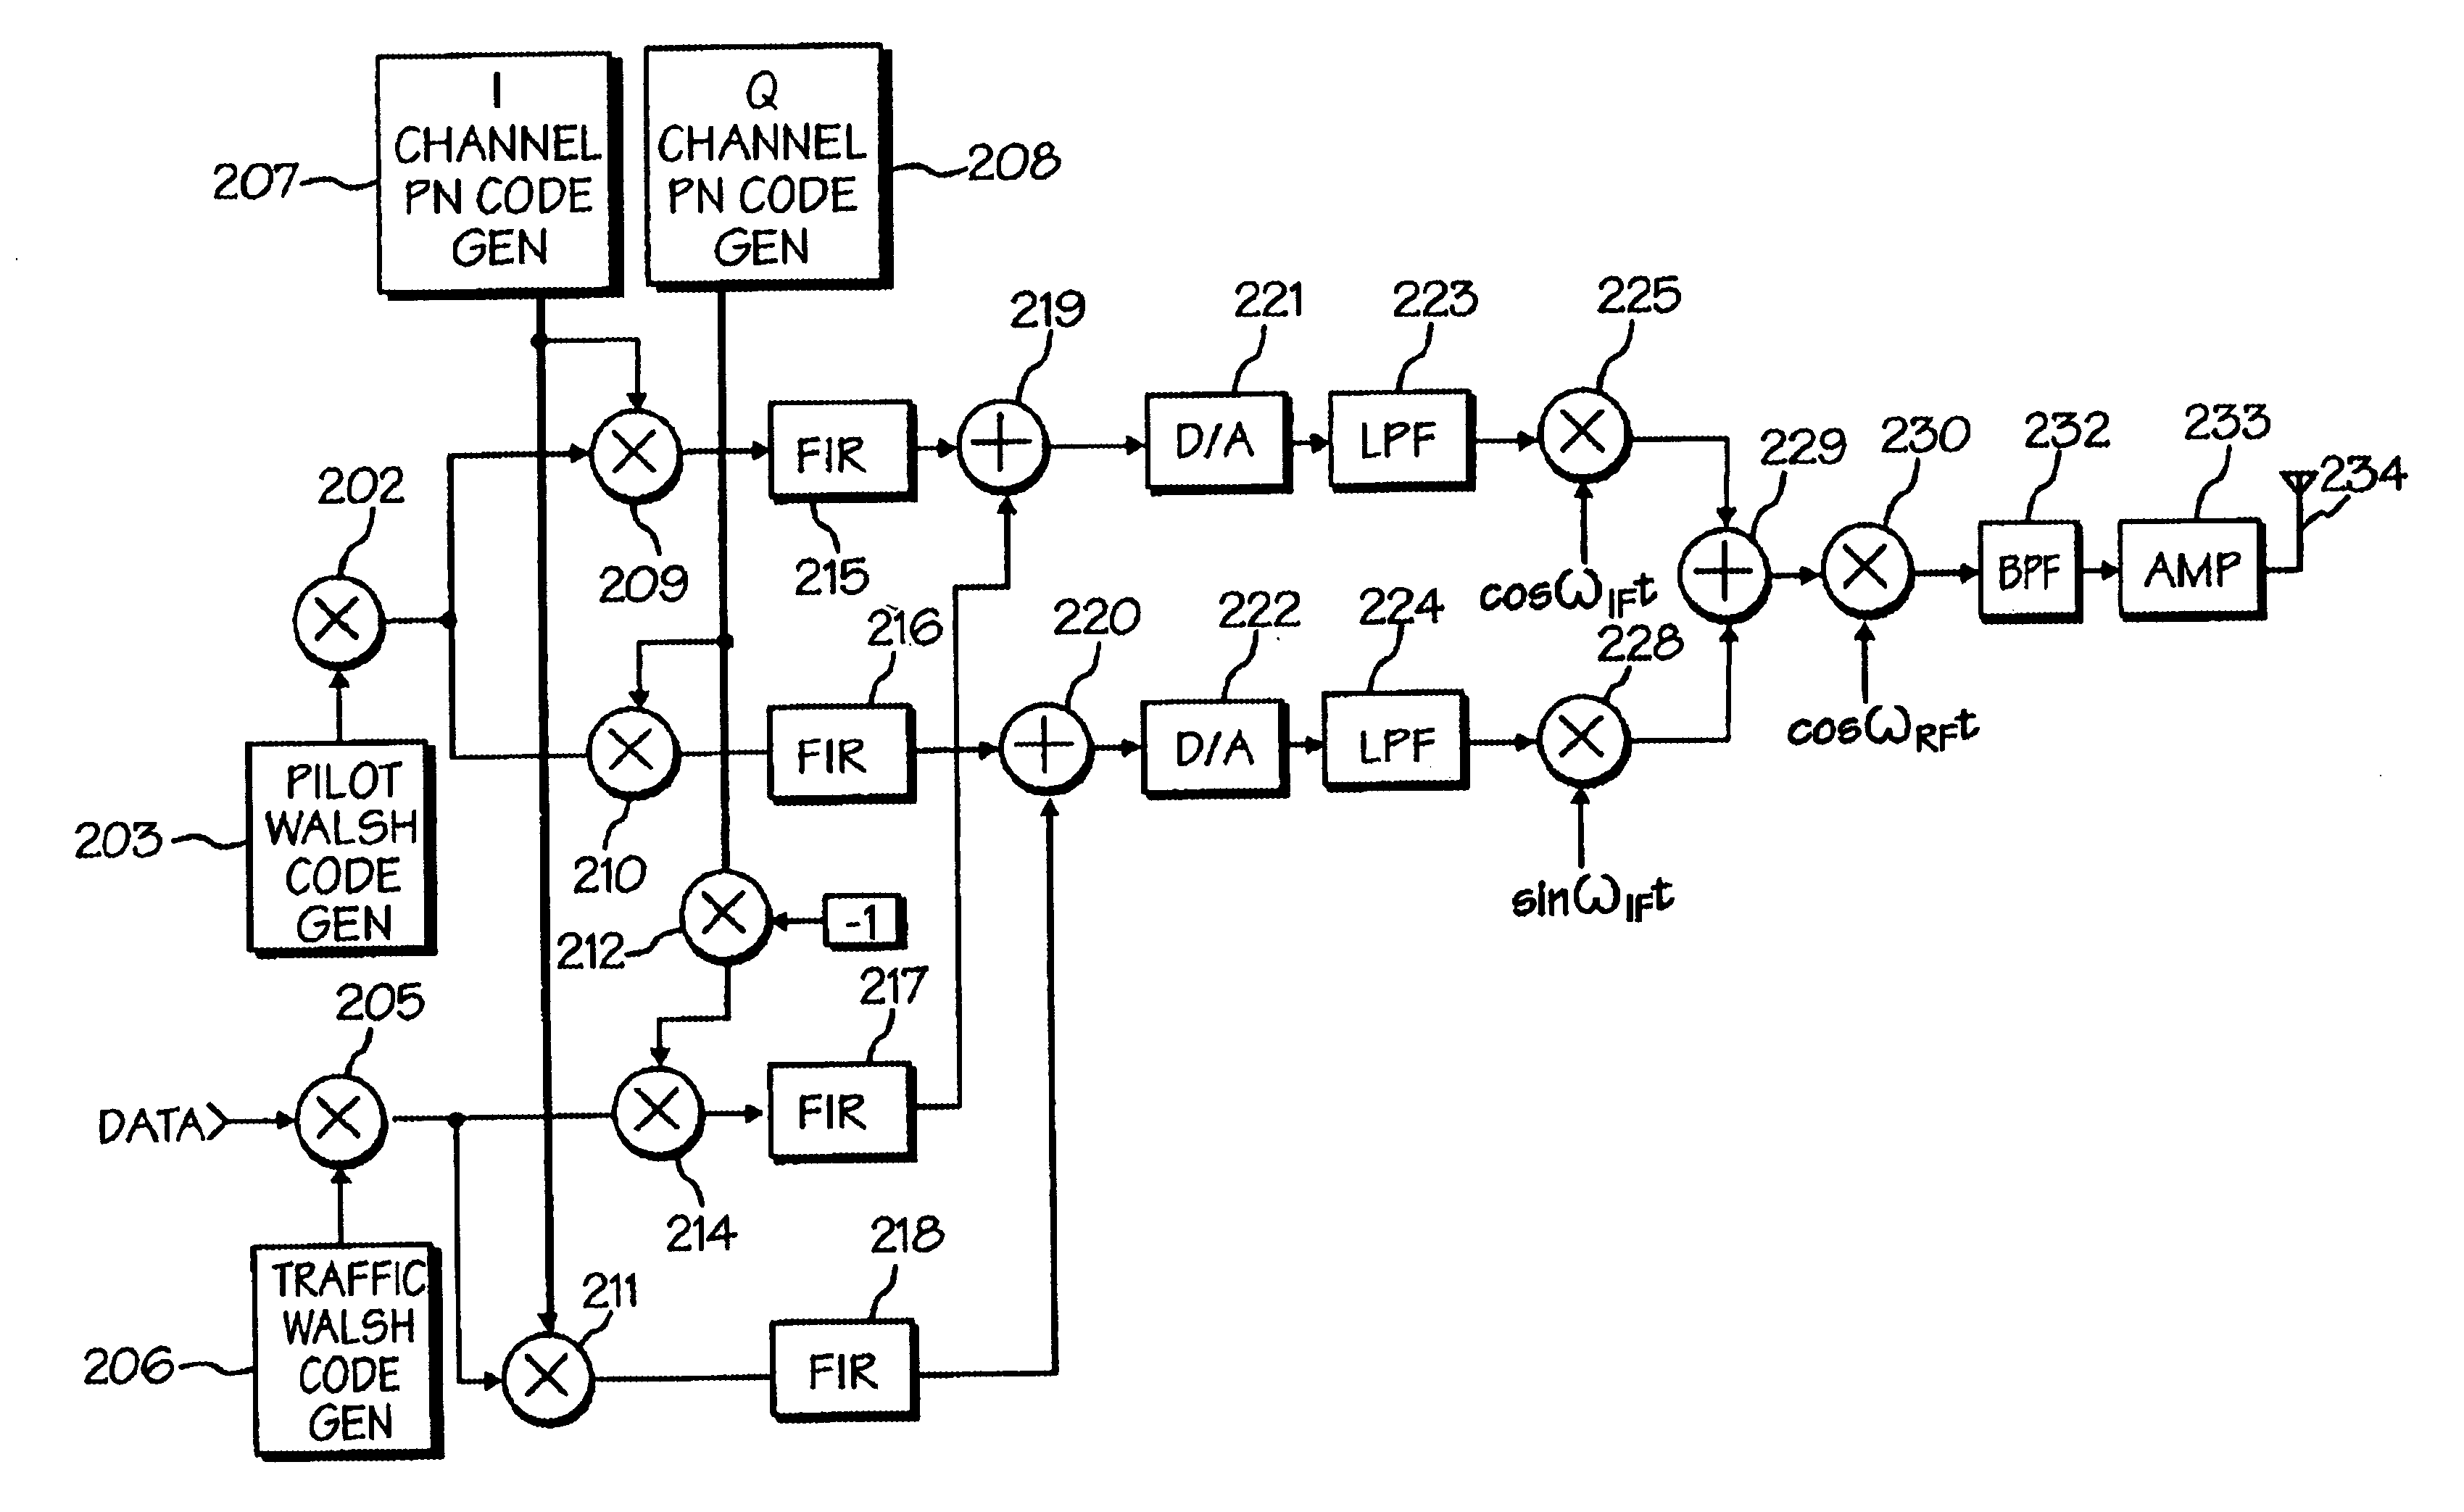 Data transmitter and receiver of a spread spectrum communication system using a pilot channel